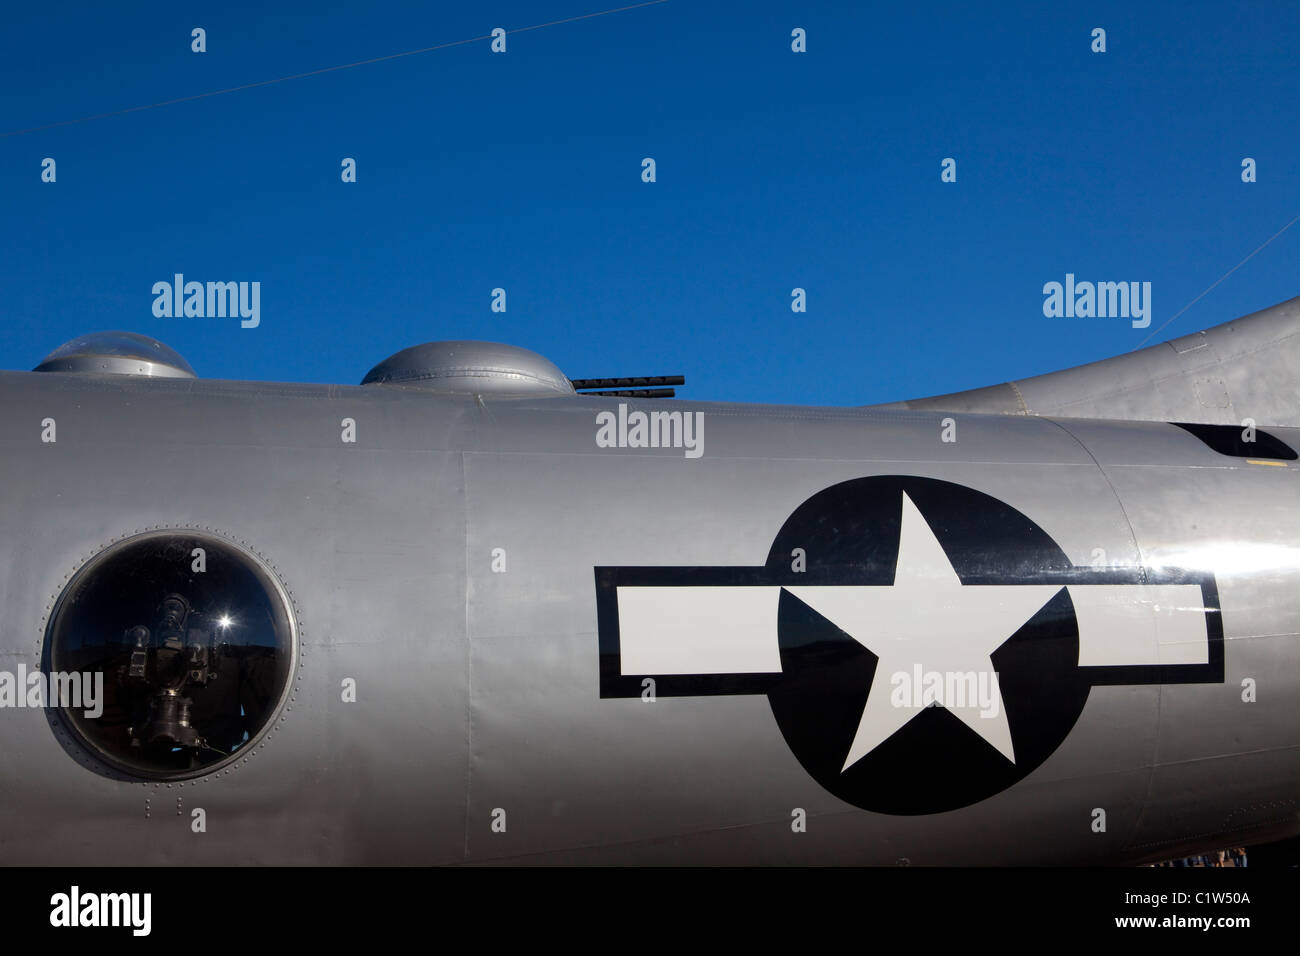 B-29 Superfortress plane, Fort Worth Alliance Airport, Fort Worth, Tarrant County, Texas, USA Stock Photo